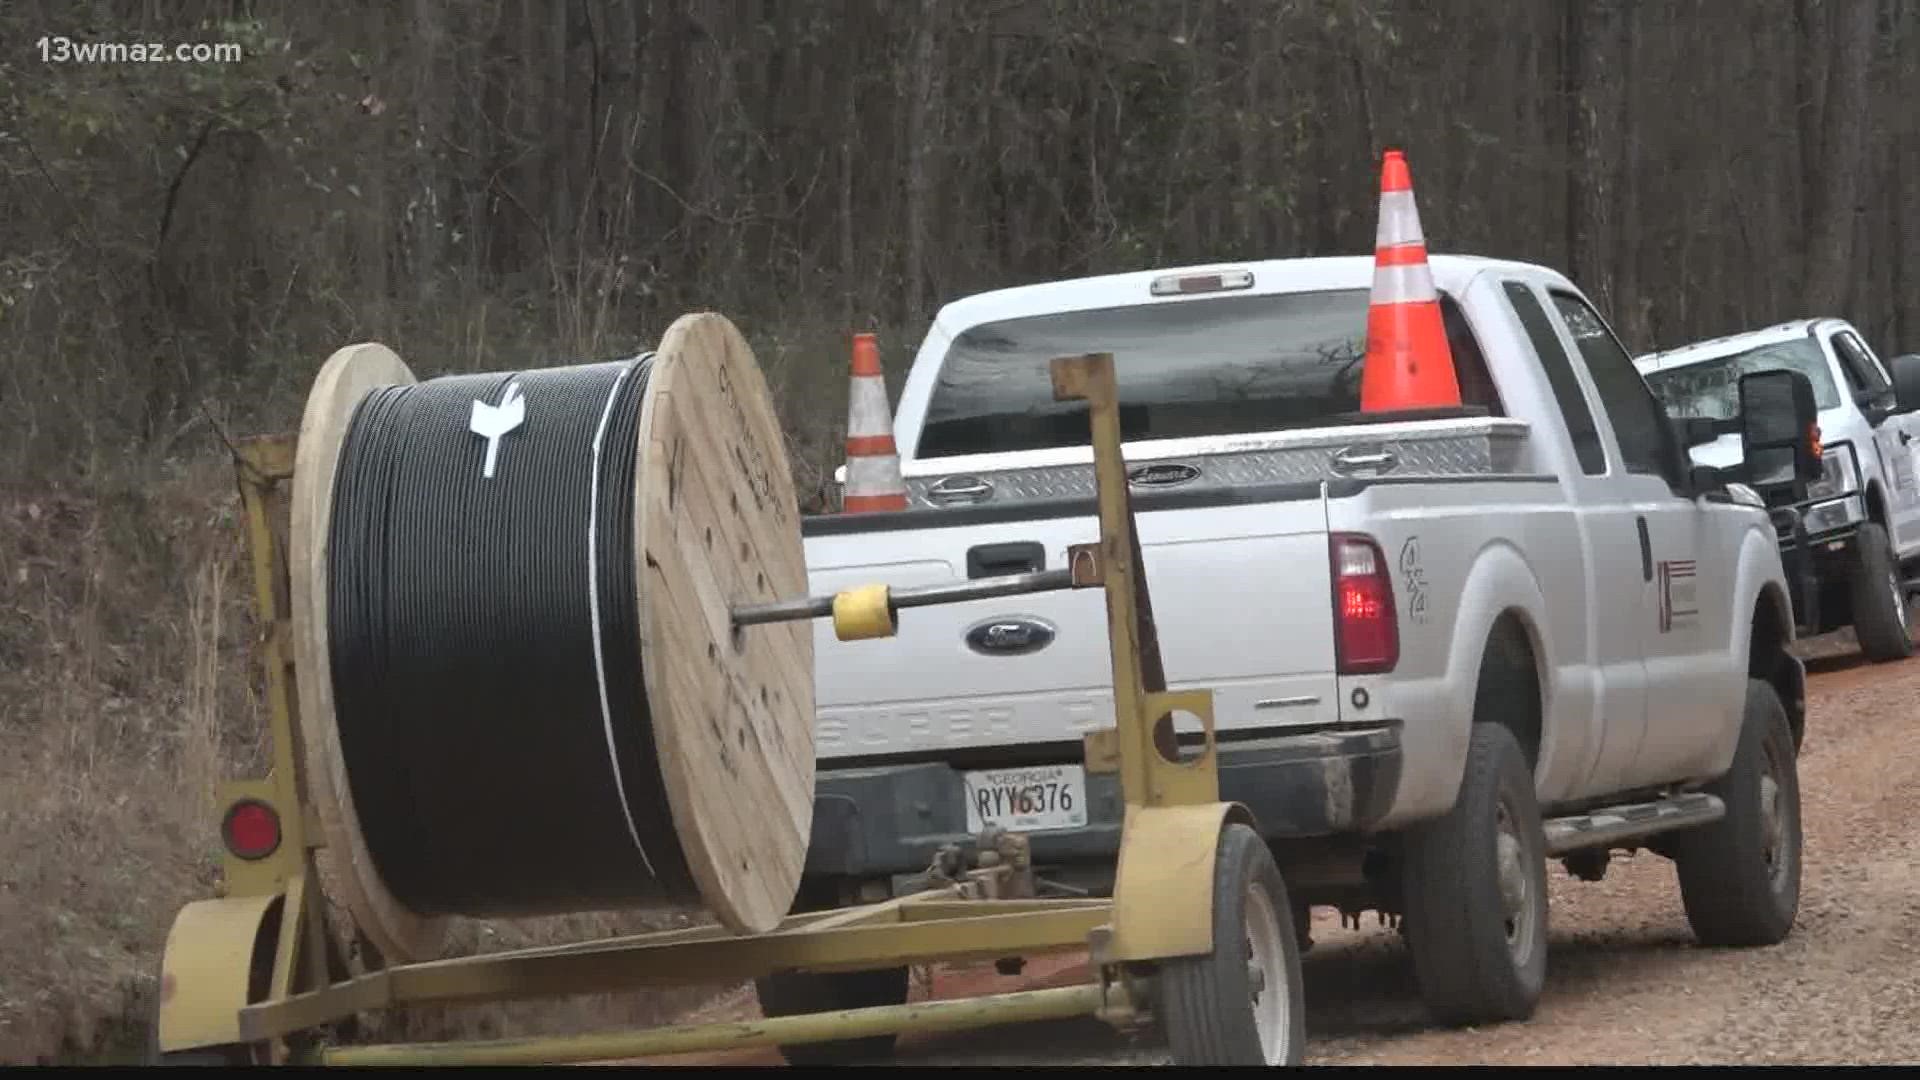 Washington County EMC says they're ready for their people to finally have faster internet.